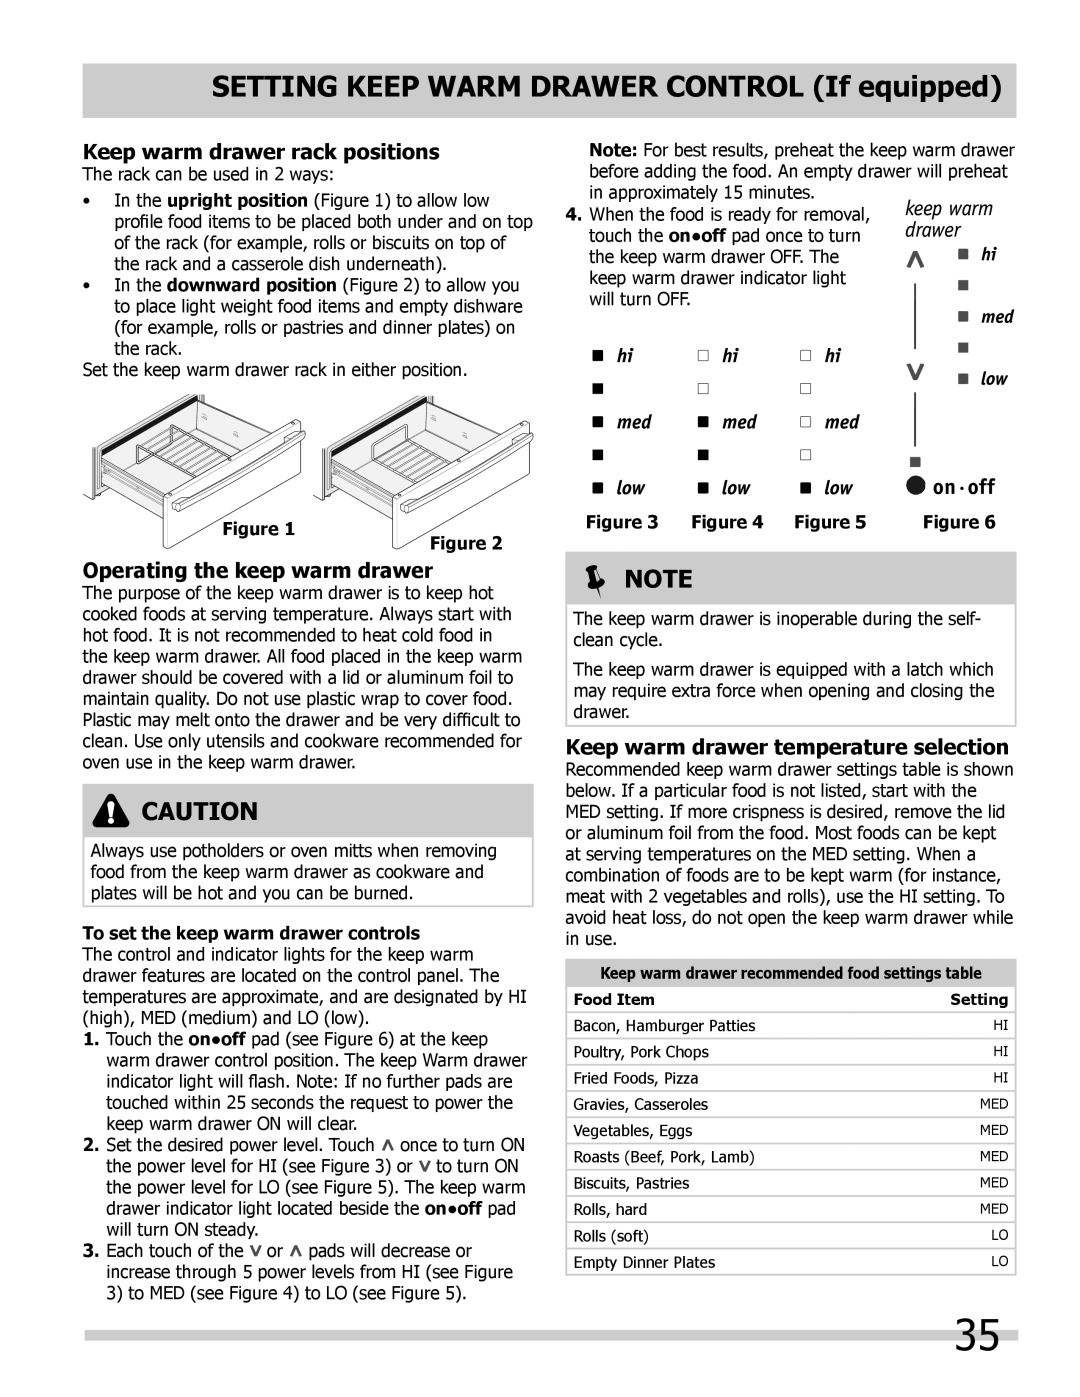 Frigidaire 318205804 manual Setting Keep warm drawer control If equipped, Keep warm drawer rack positions, Figure,  Note 